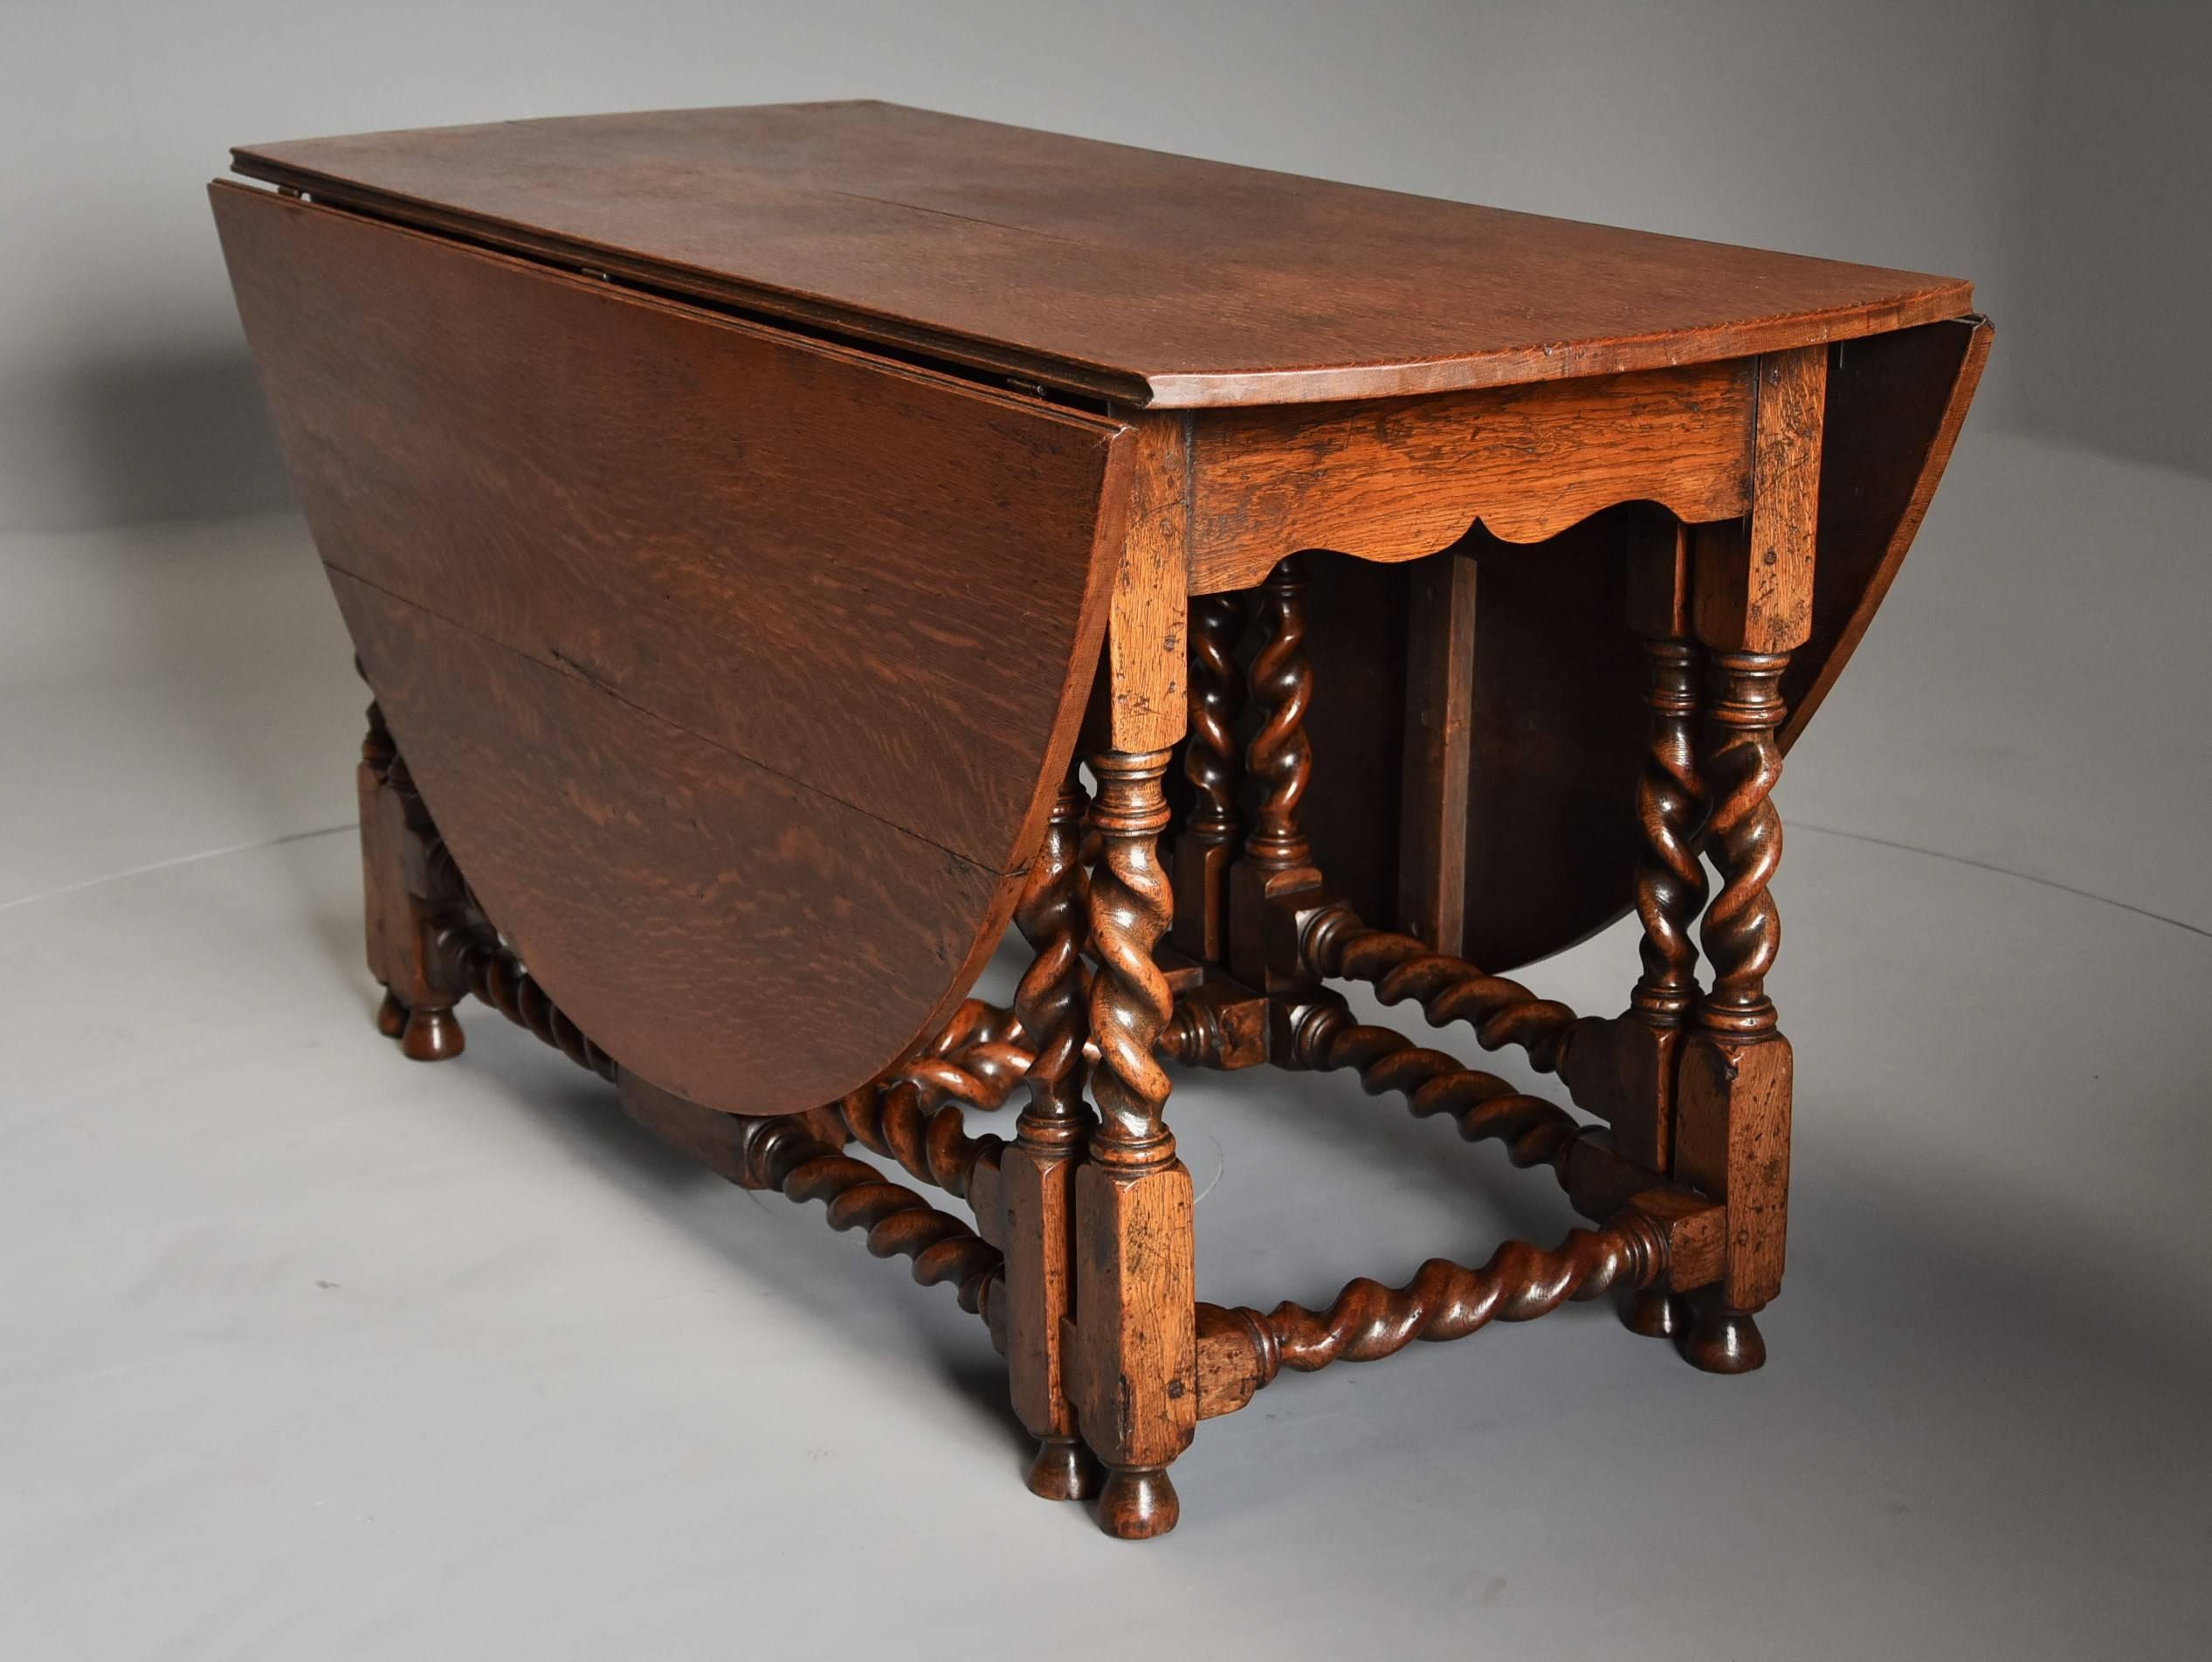 A large late 19th century oak double gate gateleg table.

This large table consists of a solid oak top leading down to barley twist legs and gates (supports) - the double gate makes for a much stronger and more stable construction of table